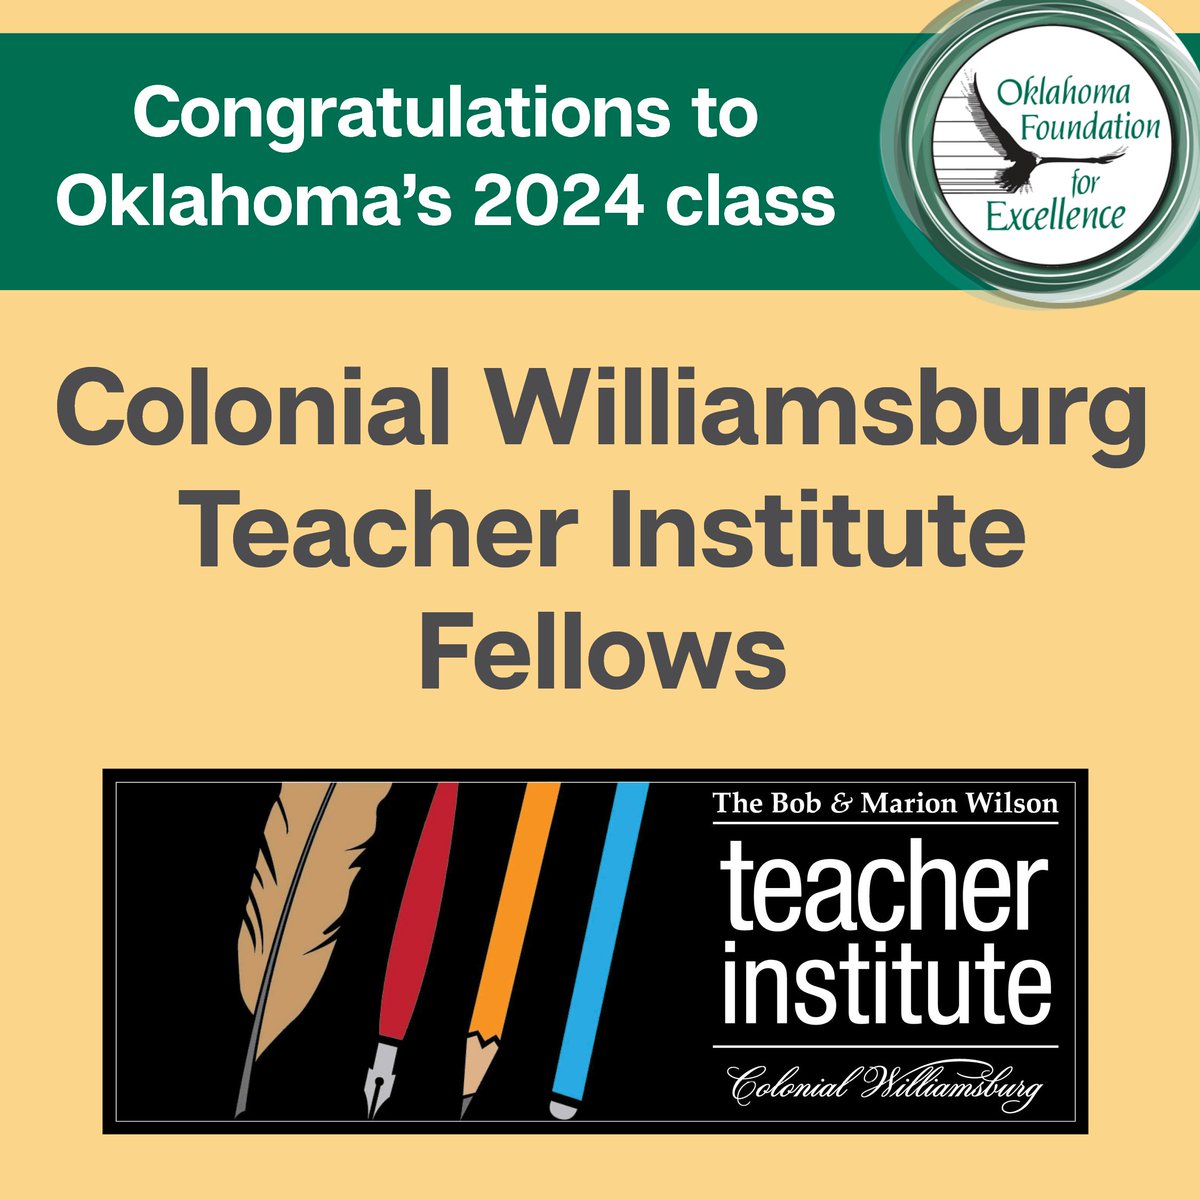 34 Oklahoma fifth- and eighth-grade teachers have been chosen for @colonialwmsburg Teacher Institute fellowships. In June, they will travel to the restored capital of 18th-century Virginia to immerse themselves in early American history. Learn more at ofe.org/oklahoma-fifth…